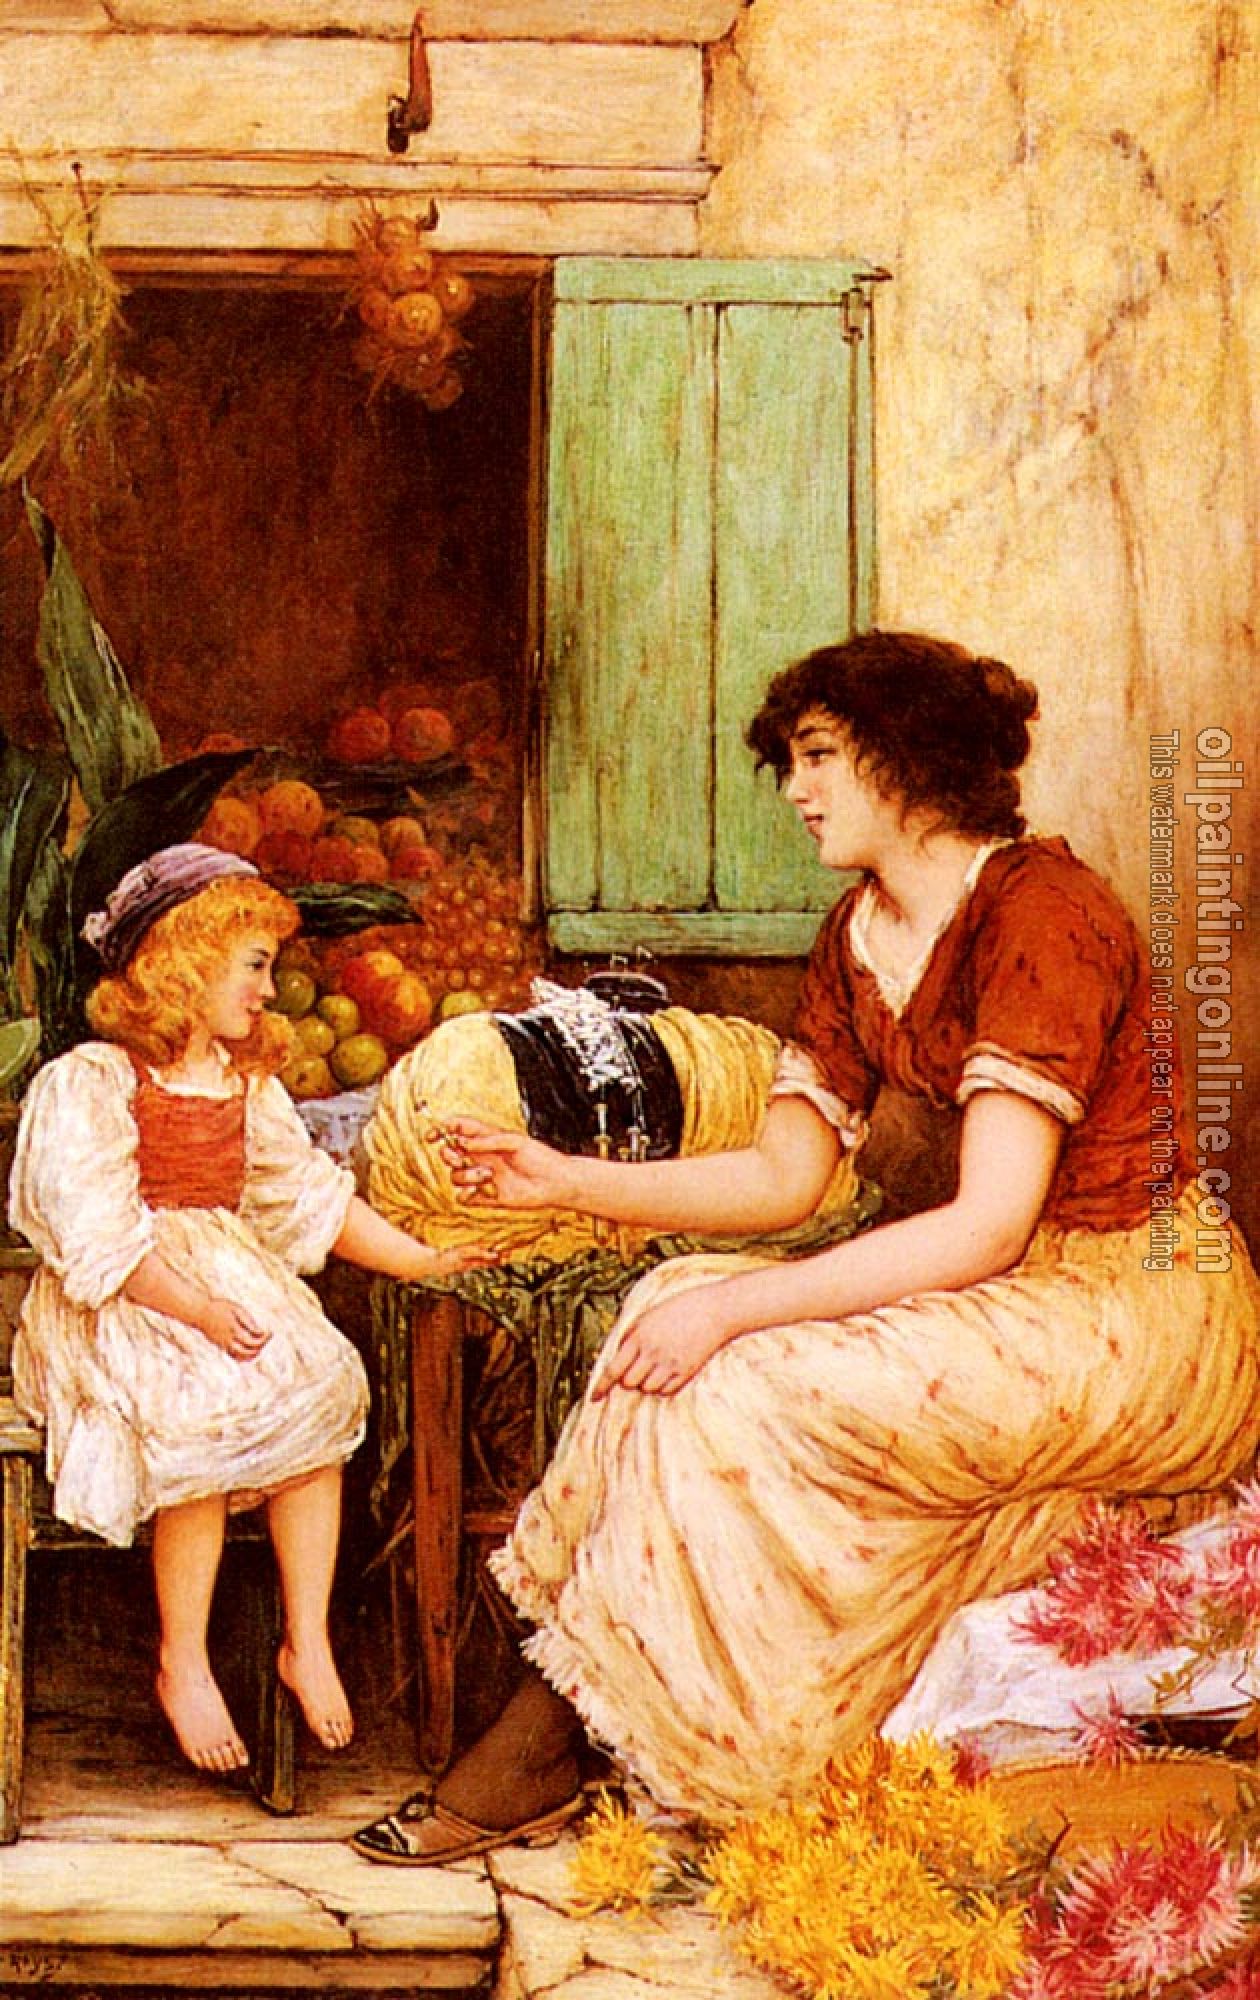 Oliver Rhys - A Young Lacemaker